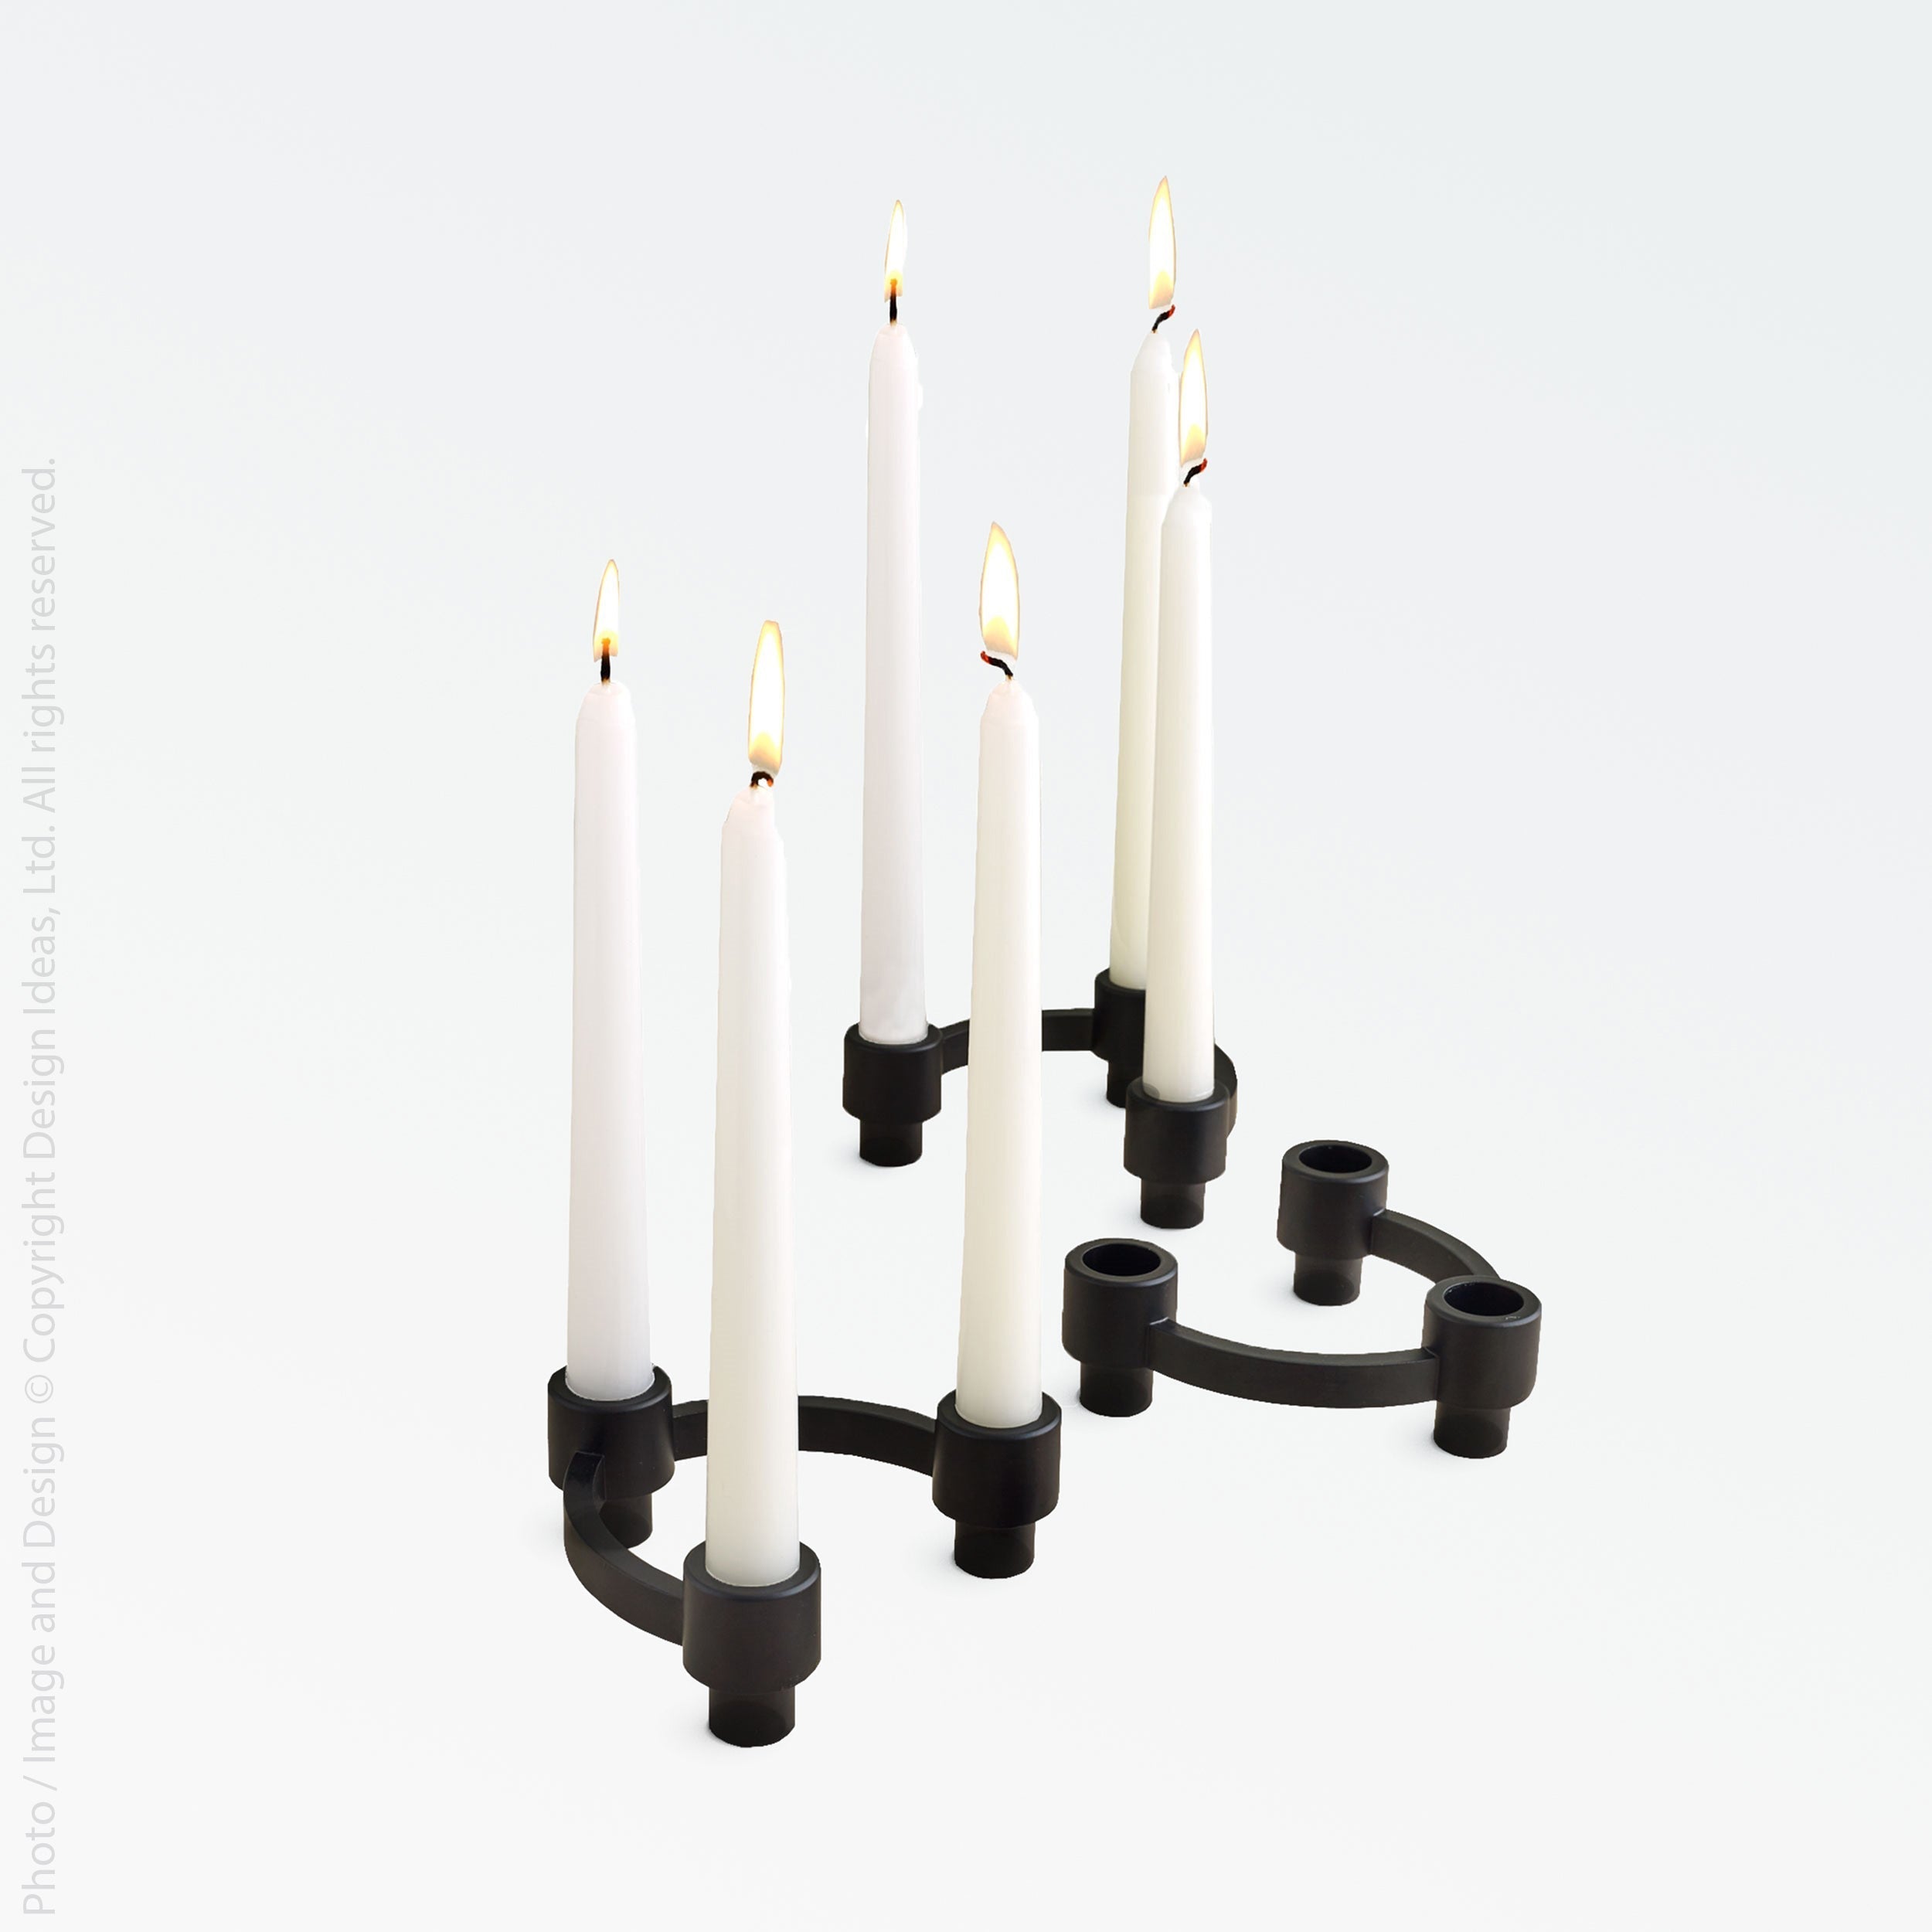 Eos Aluminum Candle Holder - Natural Color | Image 1 |  | Masterfully made with natural aluminum for long lasting use | Available in copper color | texxture home